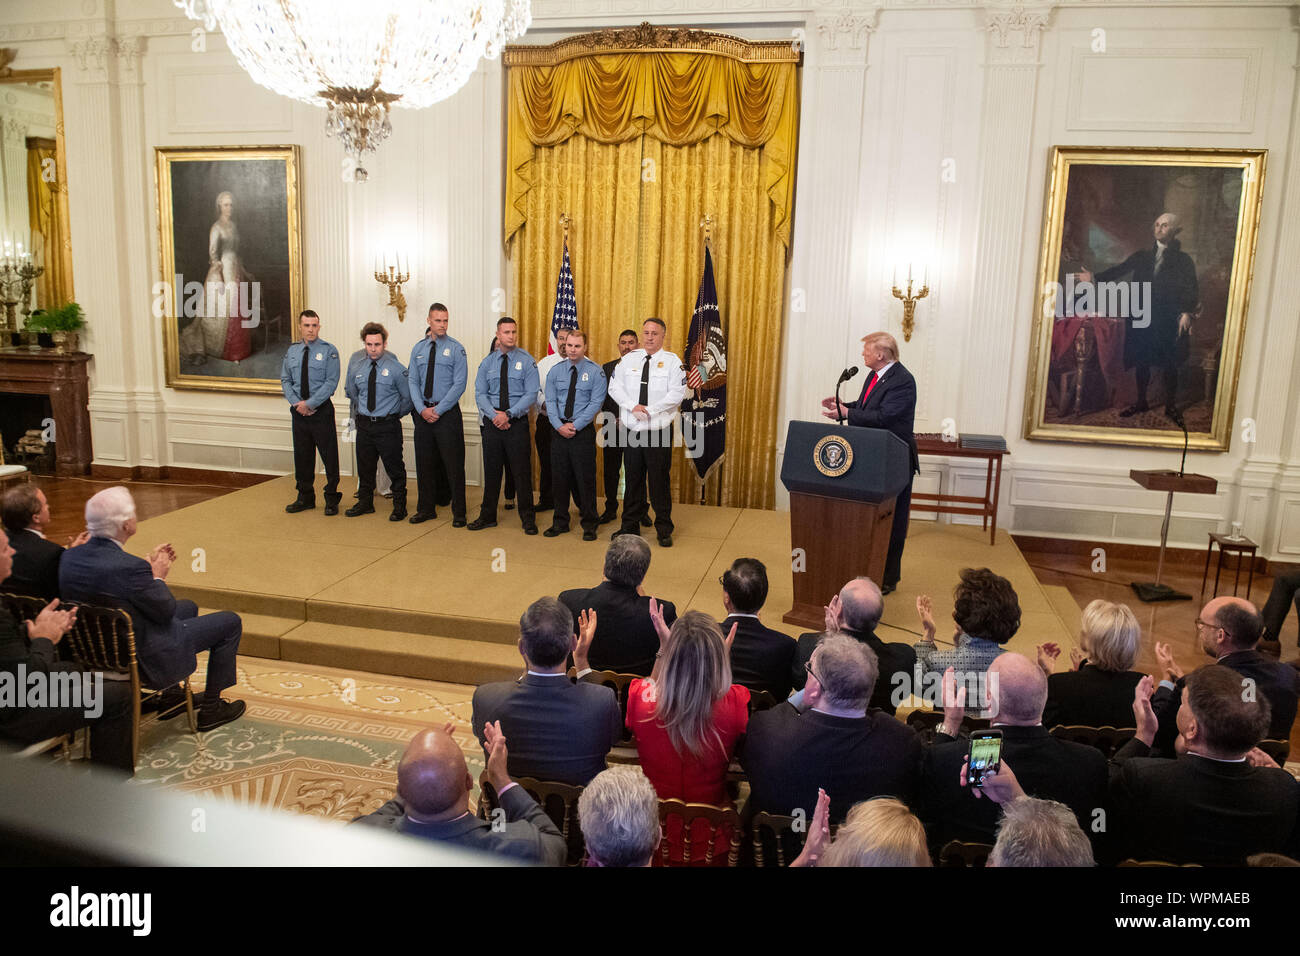 Washington, United States. 09th Sep, 2019. President Donald Trump stands with the recipients of the Public Safety Officer Medal of Valor and recipients of Heroic Commendations, during a ceremony in the East Room at the White House in Washington, DC on Monday, September 9, 2019. Trump recognized the six Dayton police officers who stoped a mass shooting on August 4th and honored 5 civilians who helped during a mass shooting at a Walmart in El Paso the day before. Photo by Kevin Dietsch/UPI Credit: UPI/Alamy Live News Stock Photo